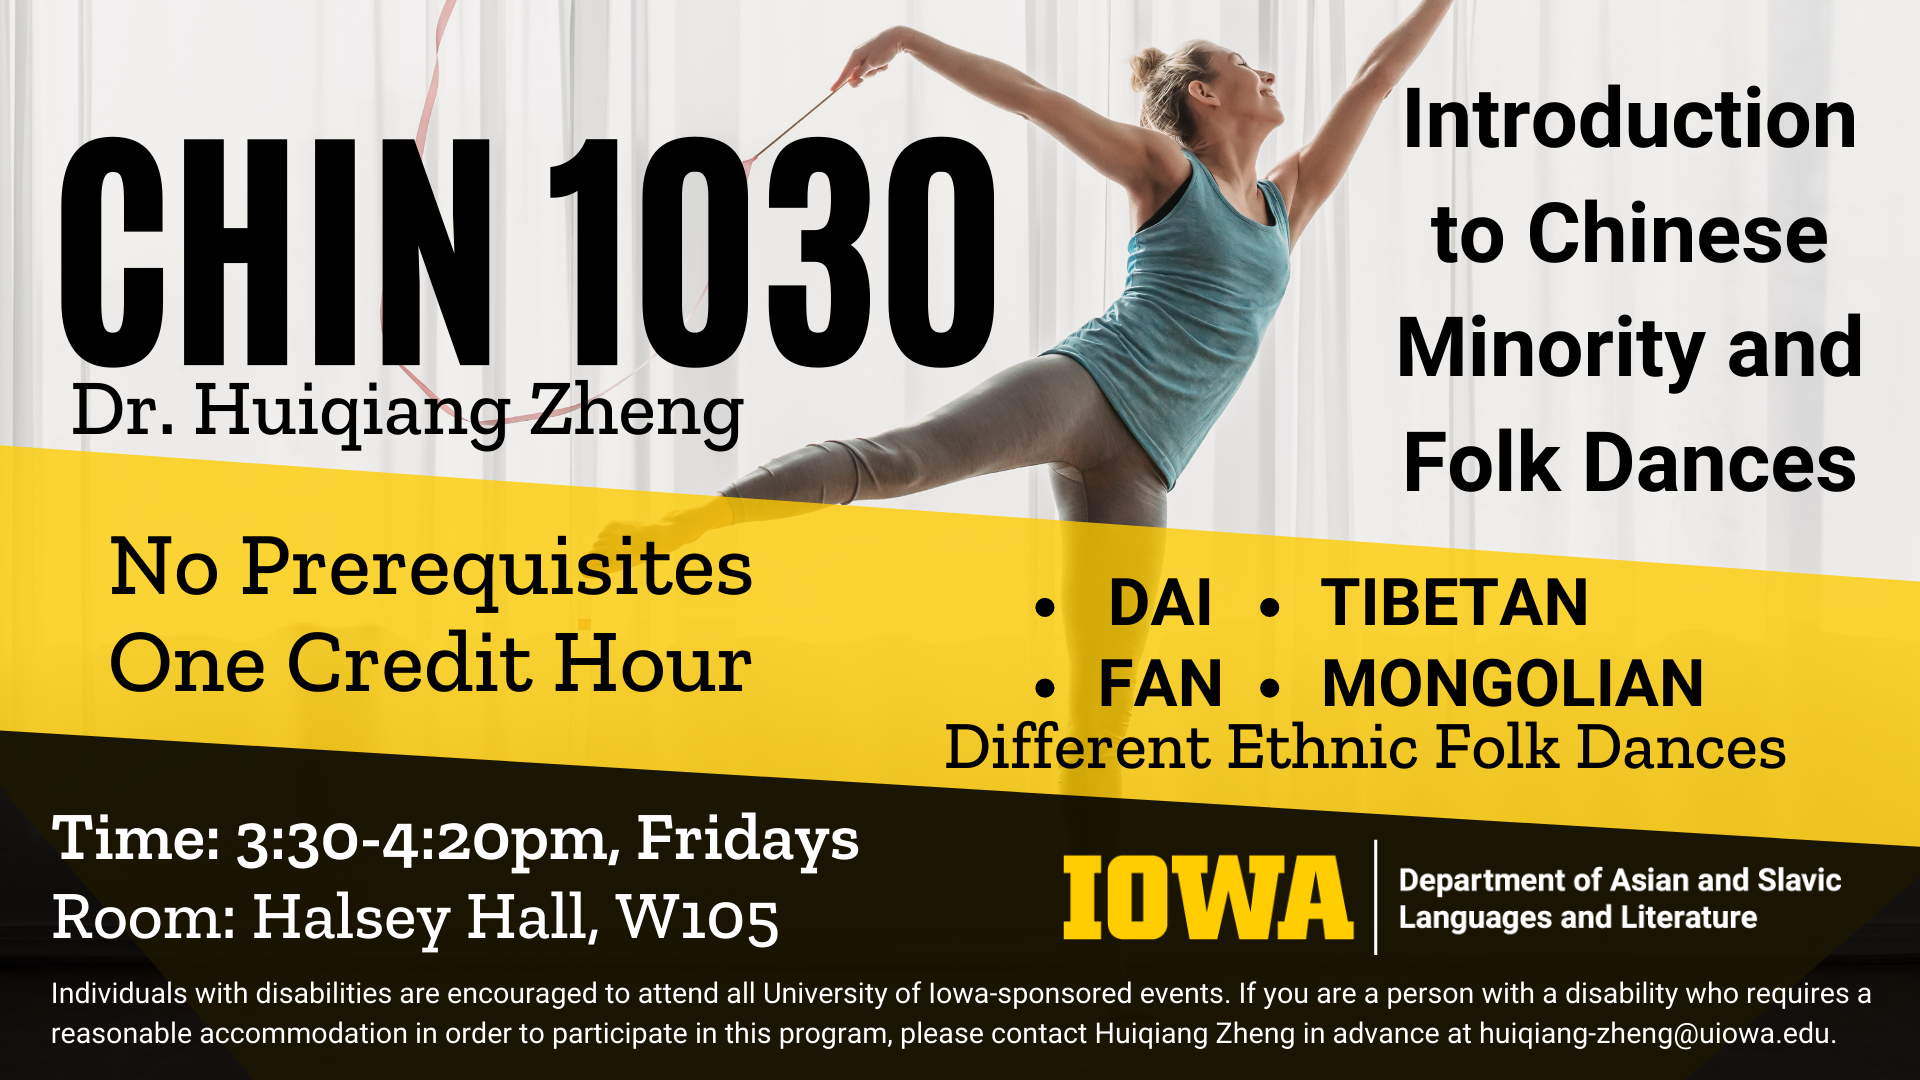 CHIN 1030: Introduction to Chinese Minority and Folk Dances, 3:30-4:30 p.m. Halsey Hall W105